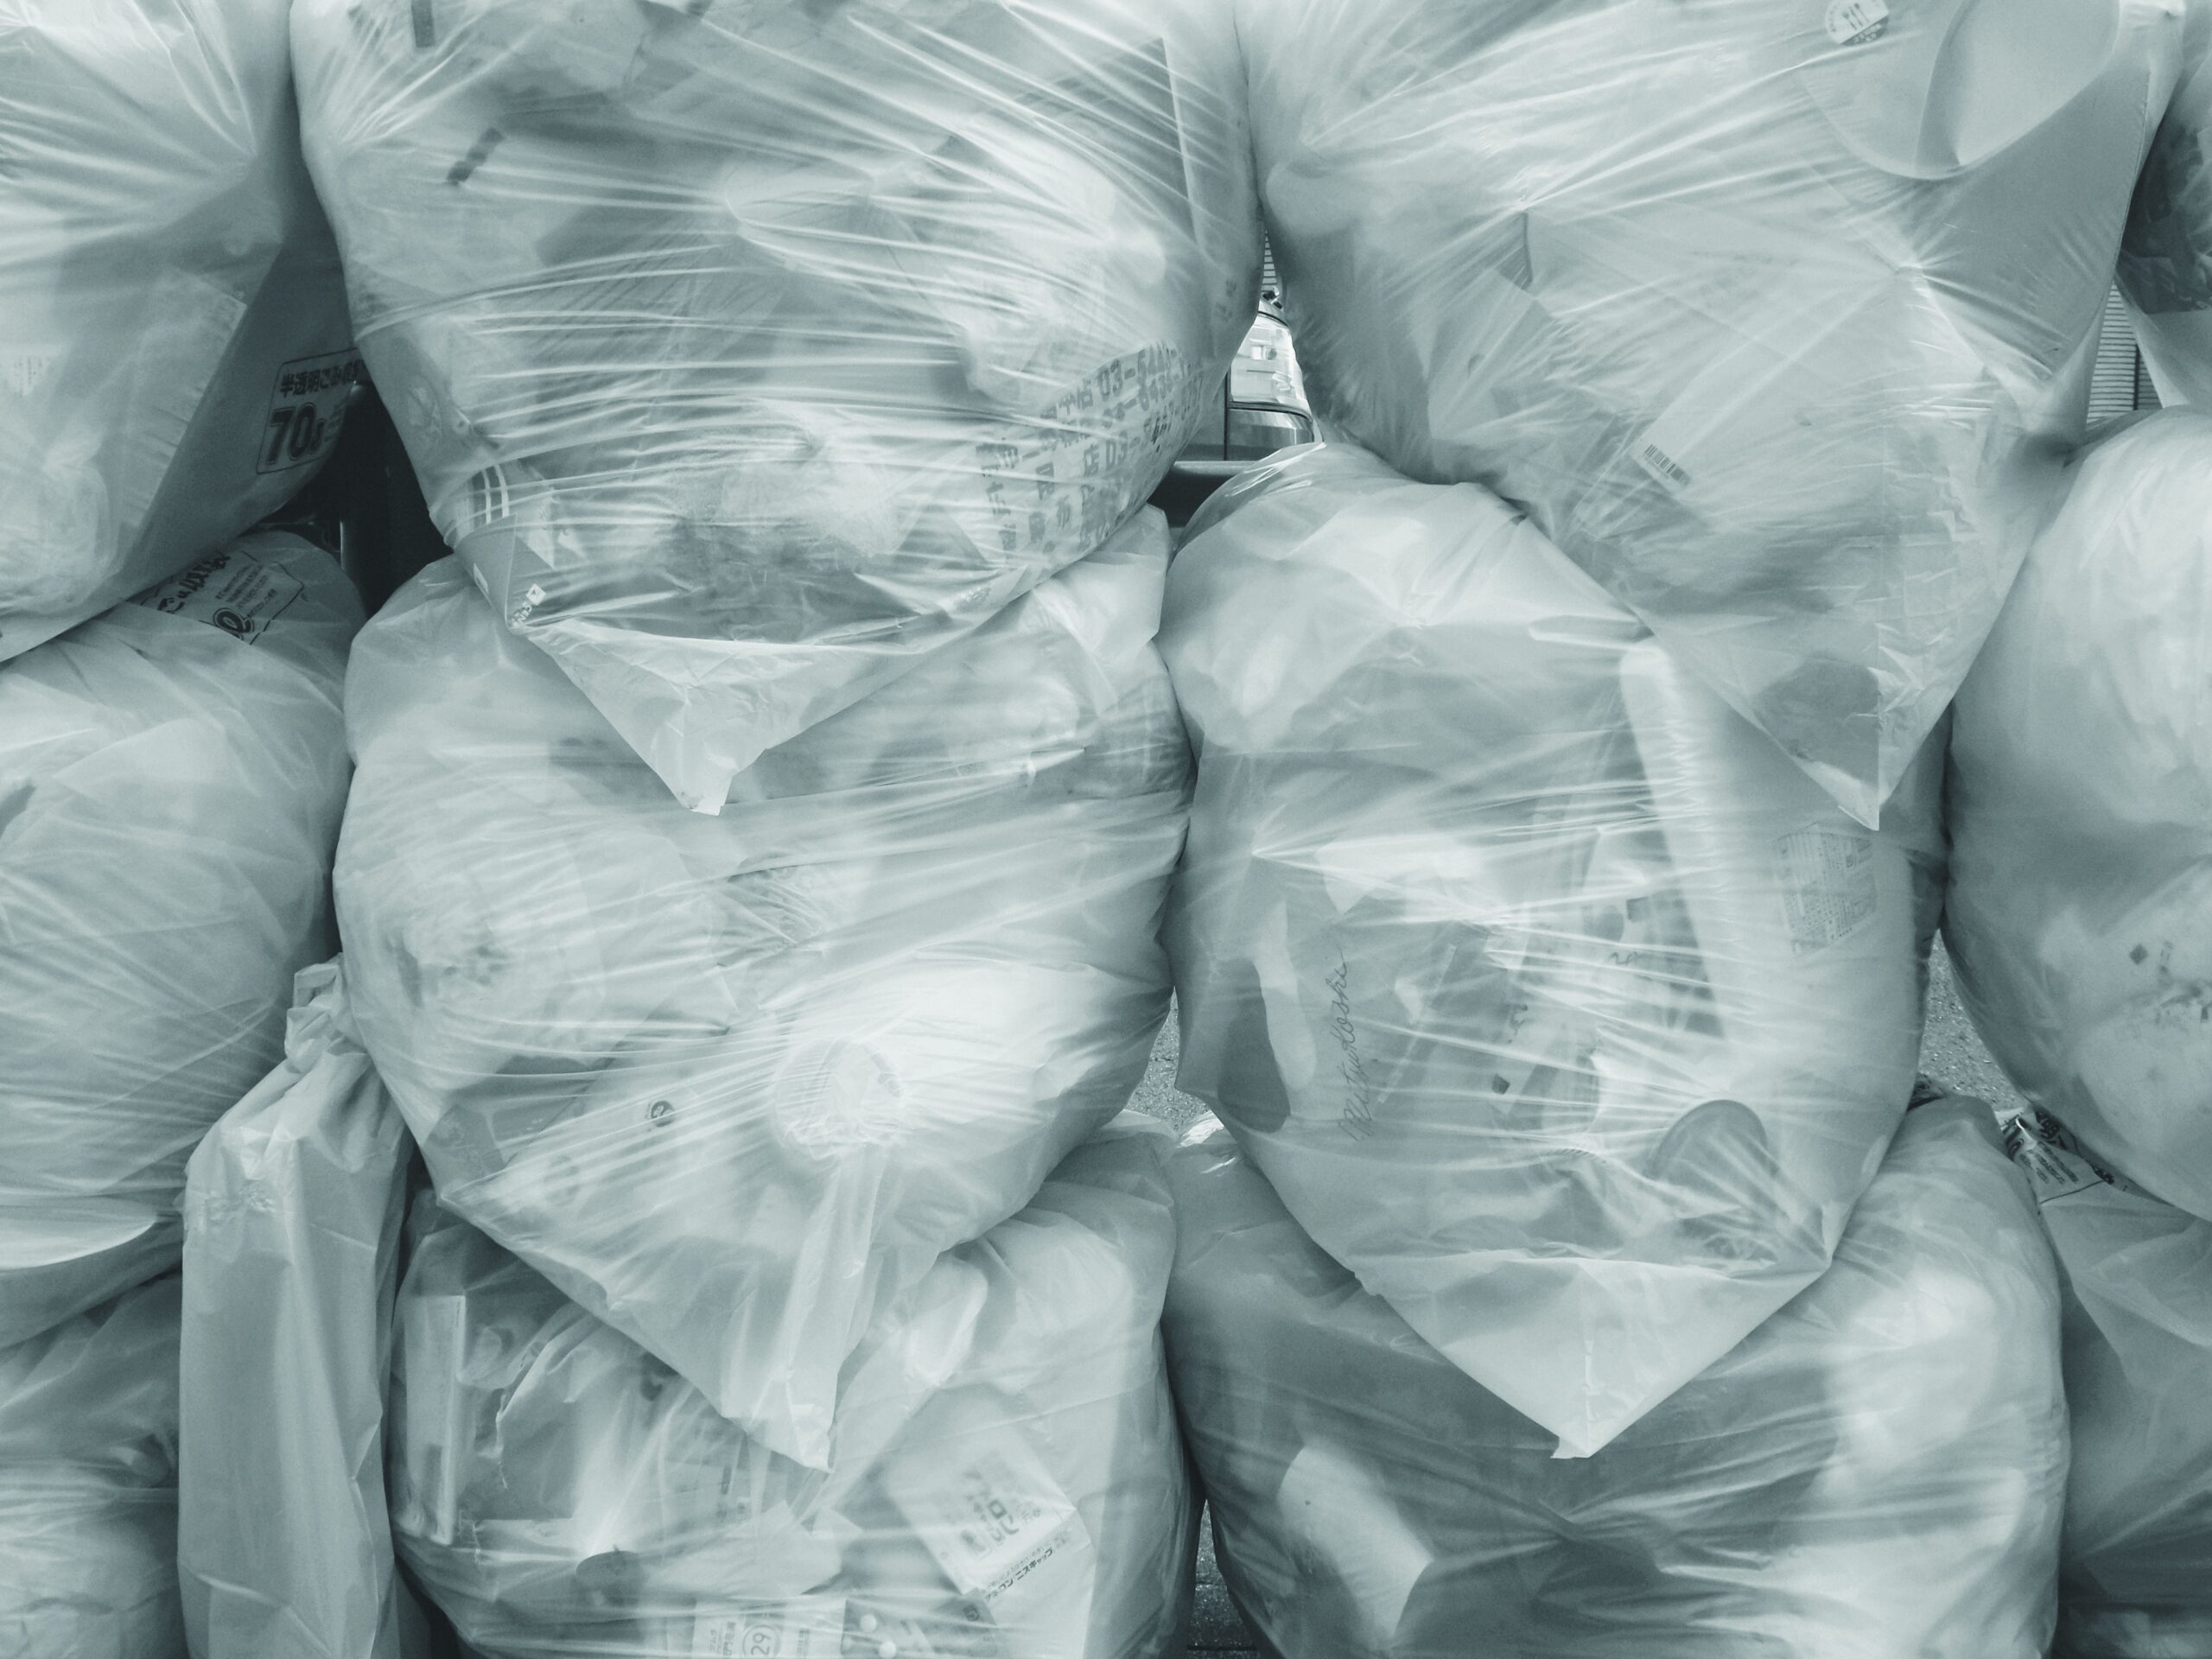 What Are The Advantages Of Compostable Packaging?